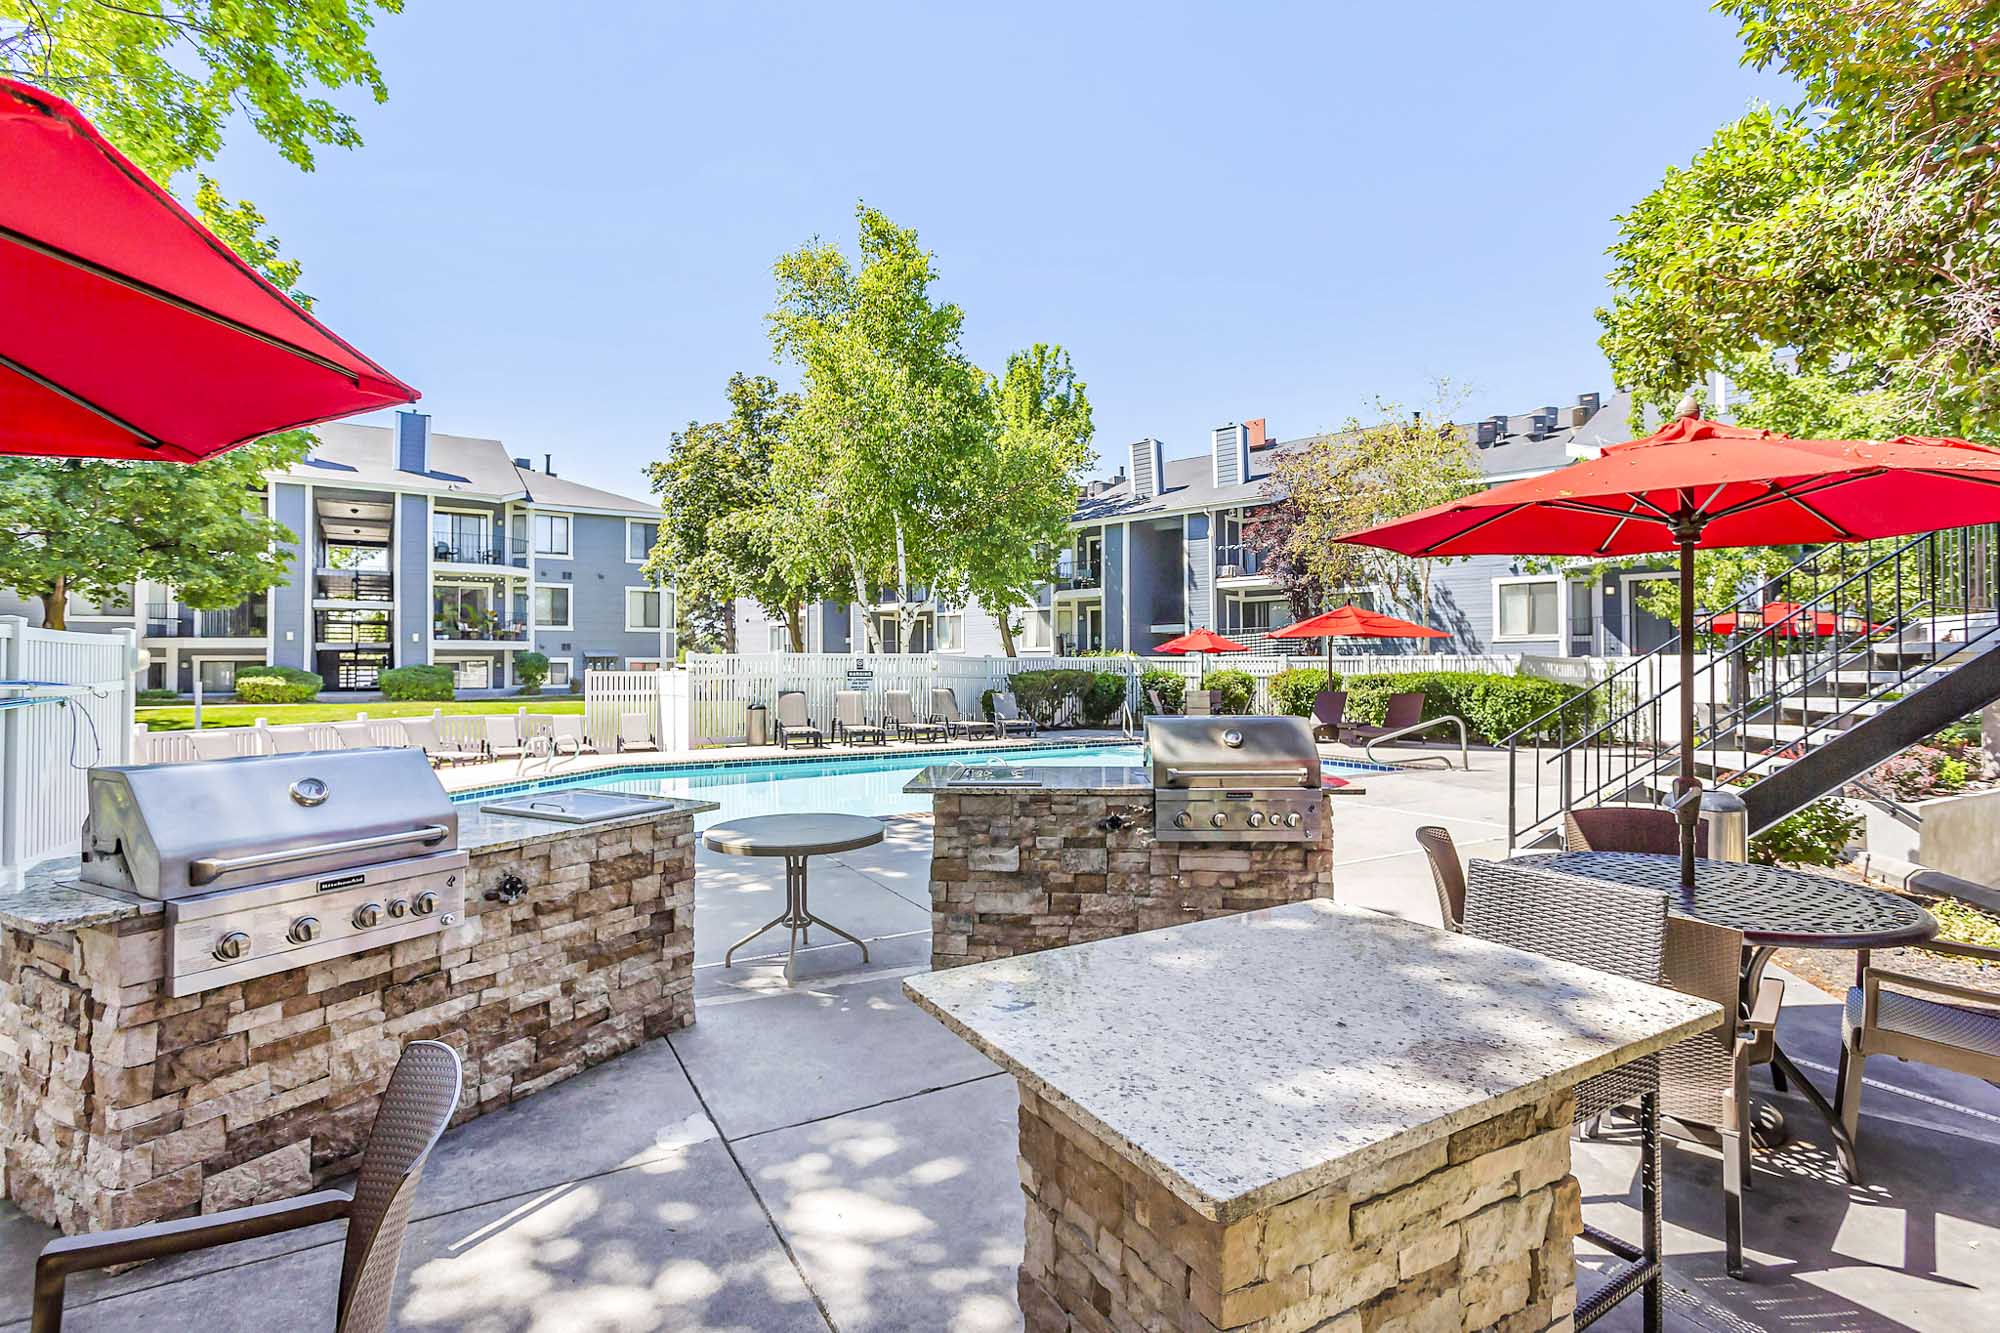 The grilling stations at James Pointe apartments near Salt Lake City, Utah.